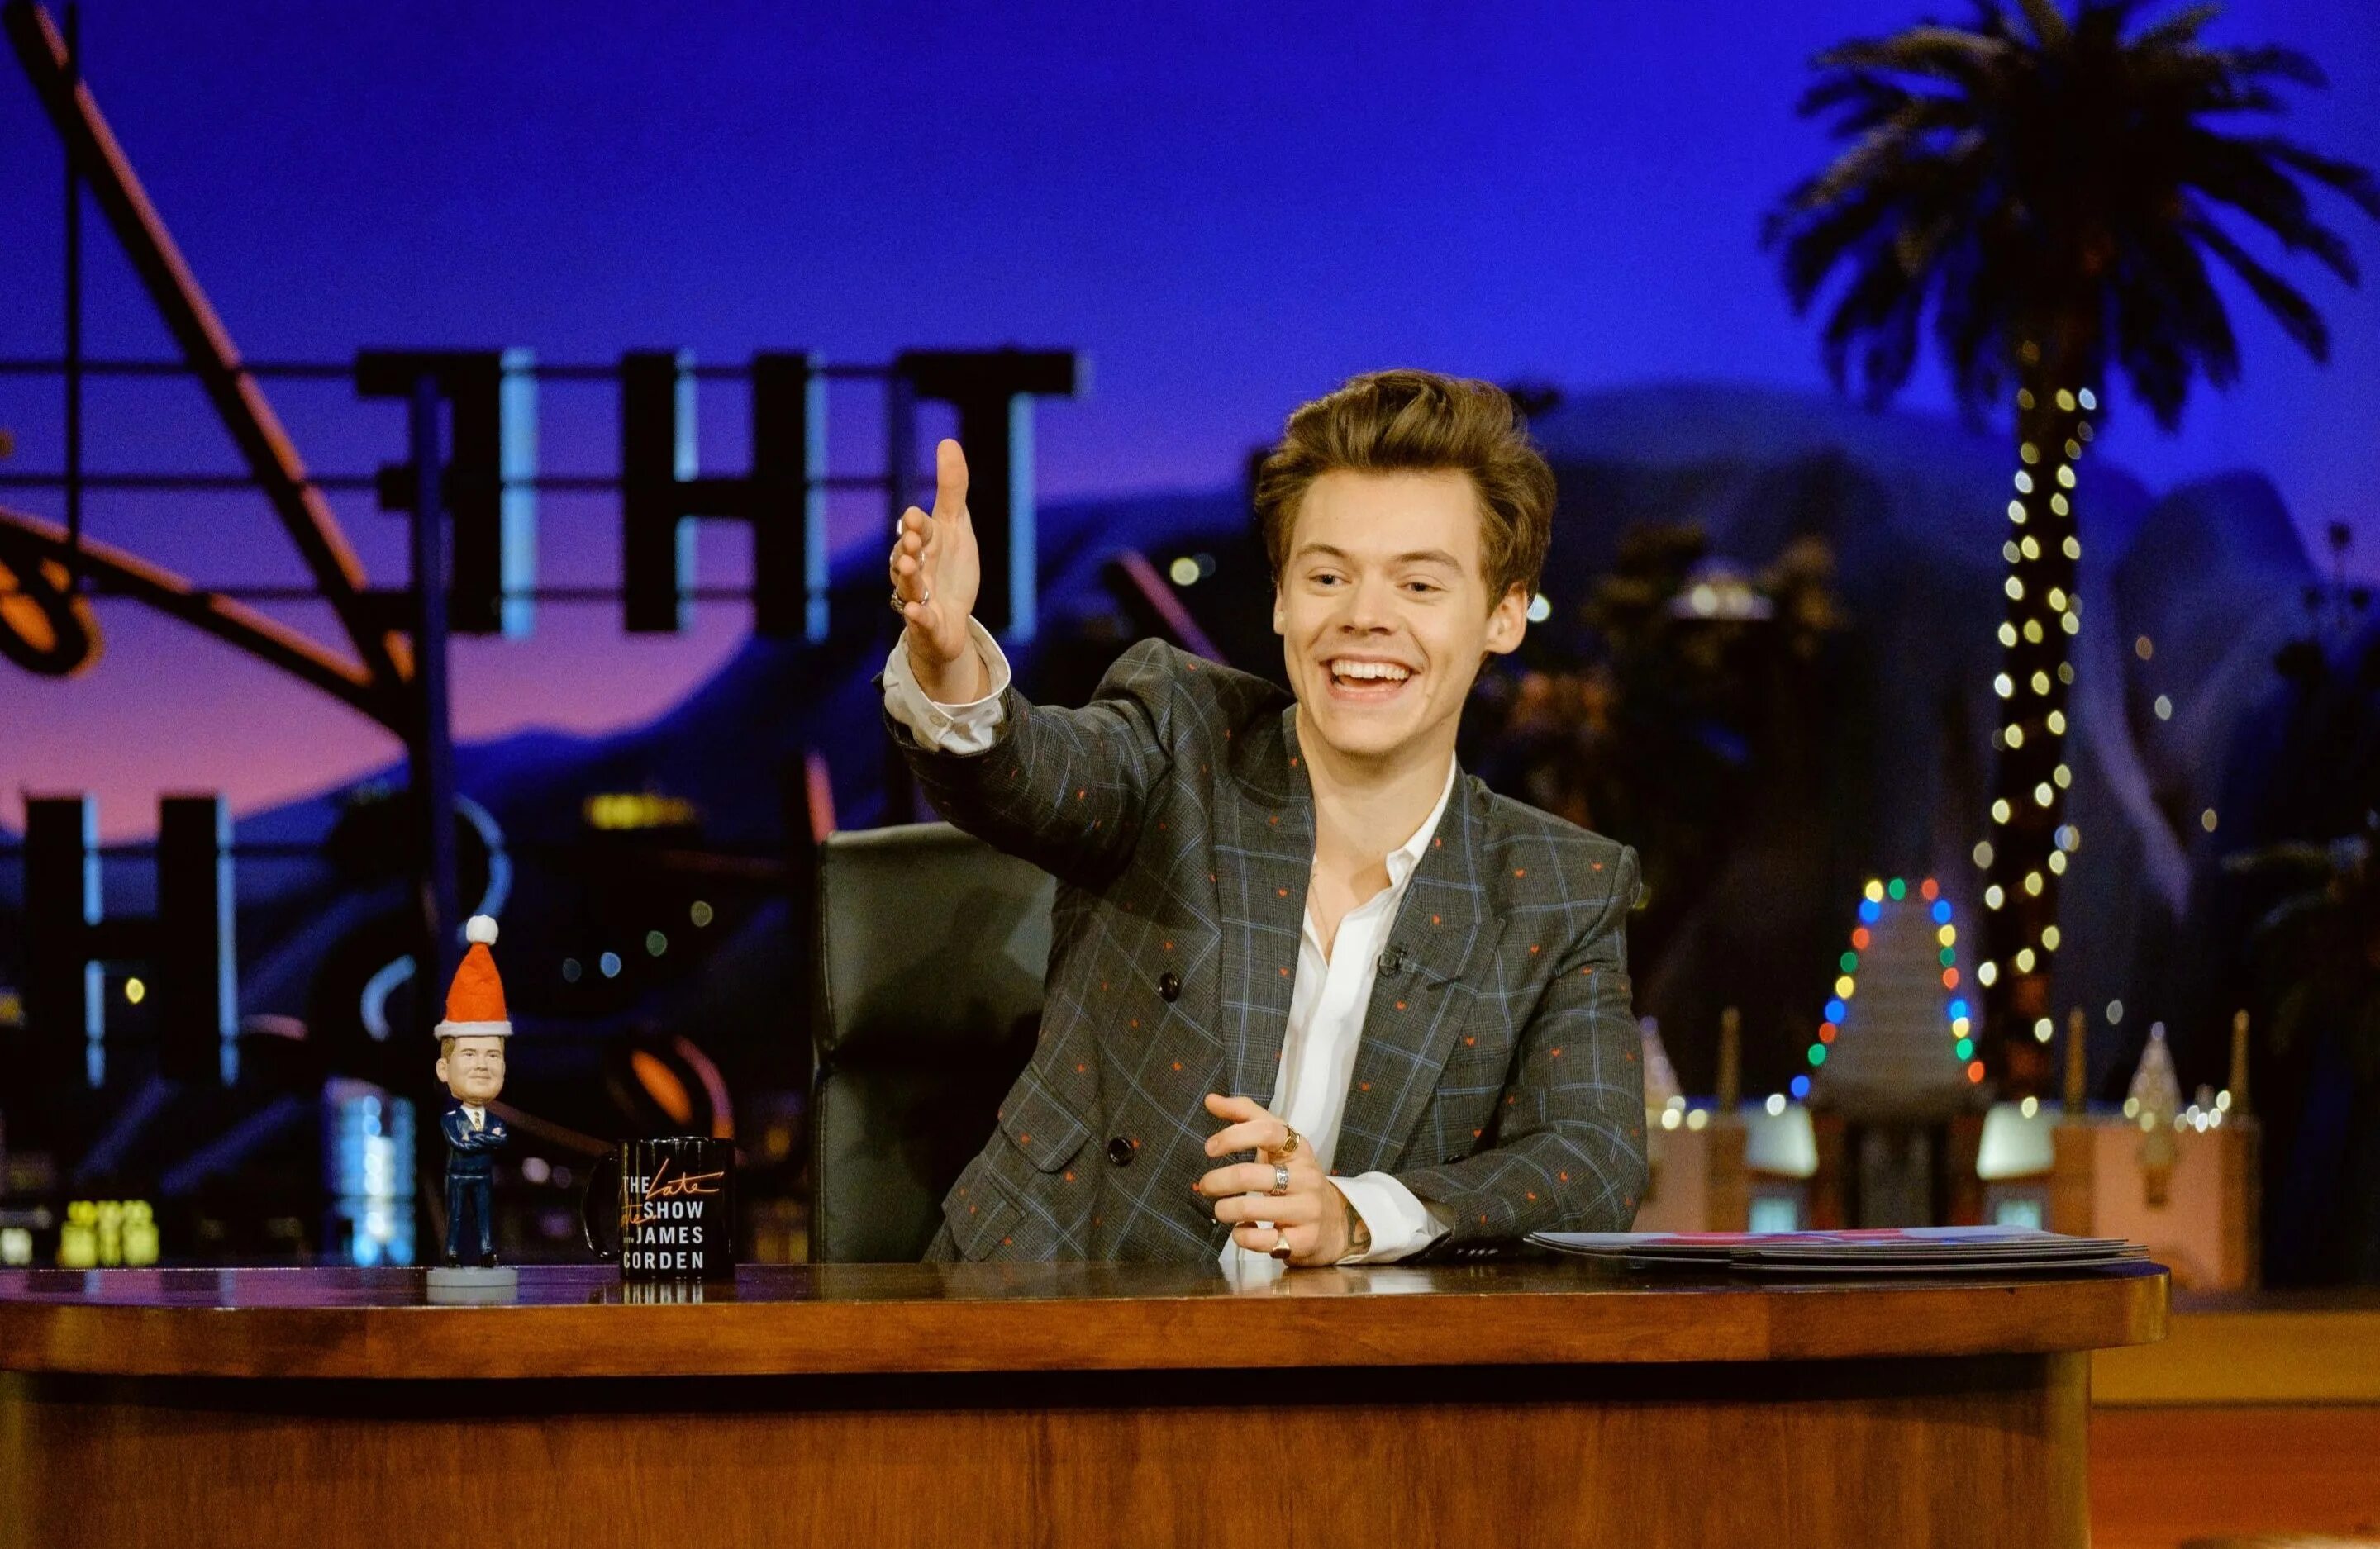 Harry Styles and James Corden. Harry Styles late late show. Late night calls